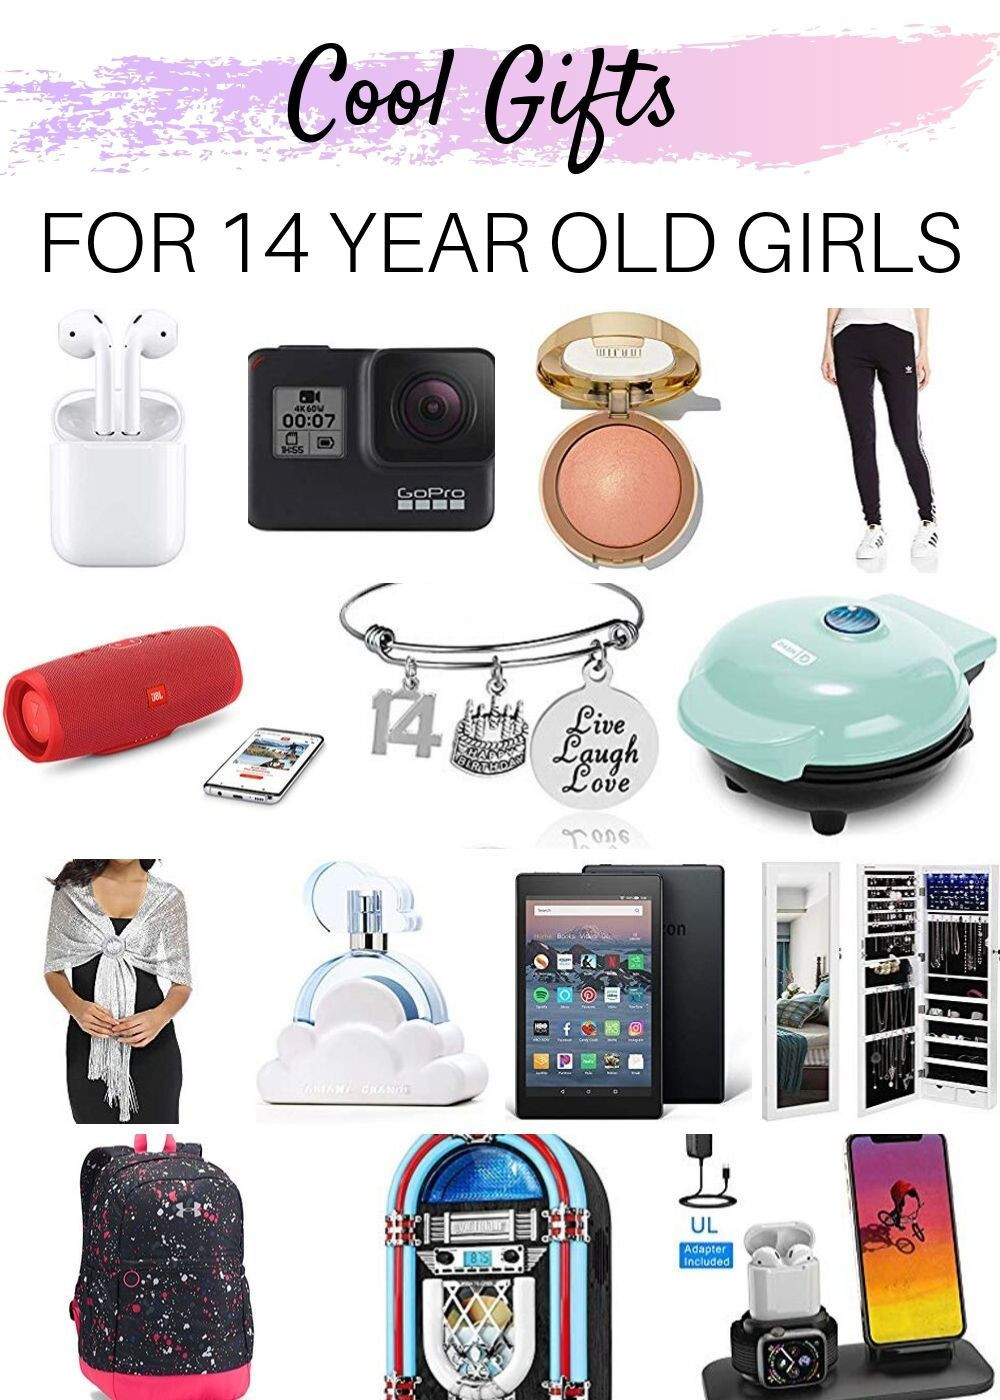 Gift Ideas For 14 Year Old Girls
 125 Best Gifts For 14 Year Old Girls 2021 • Absolute